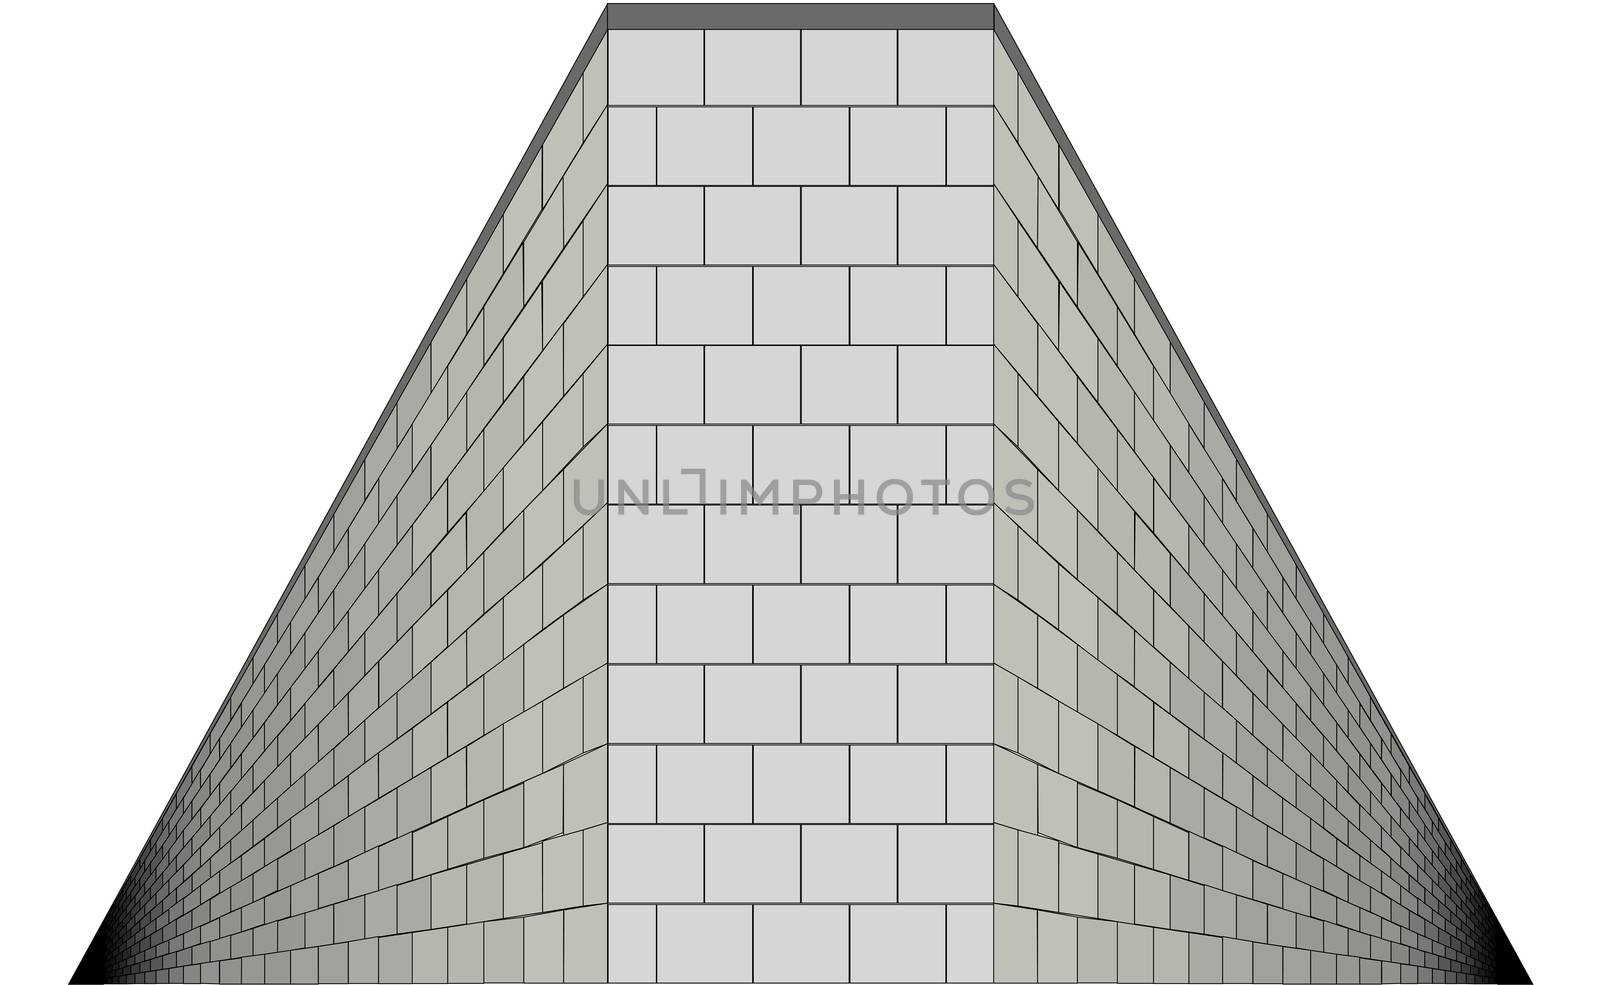 A wall with both sides going into infinity